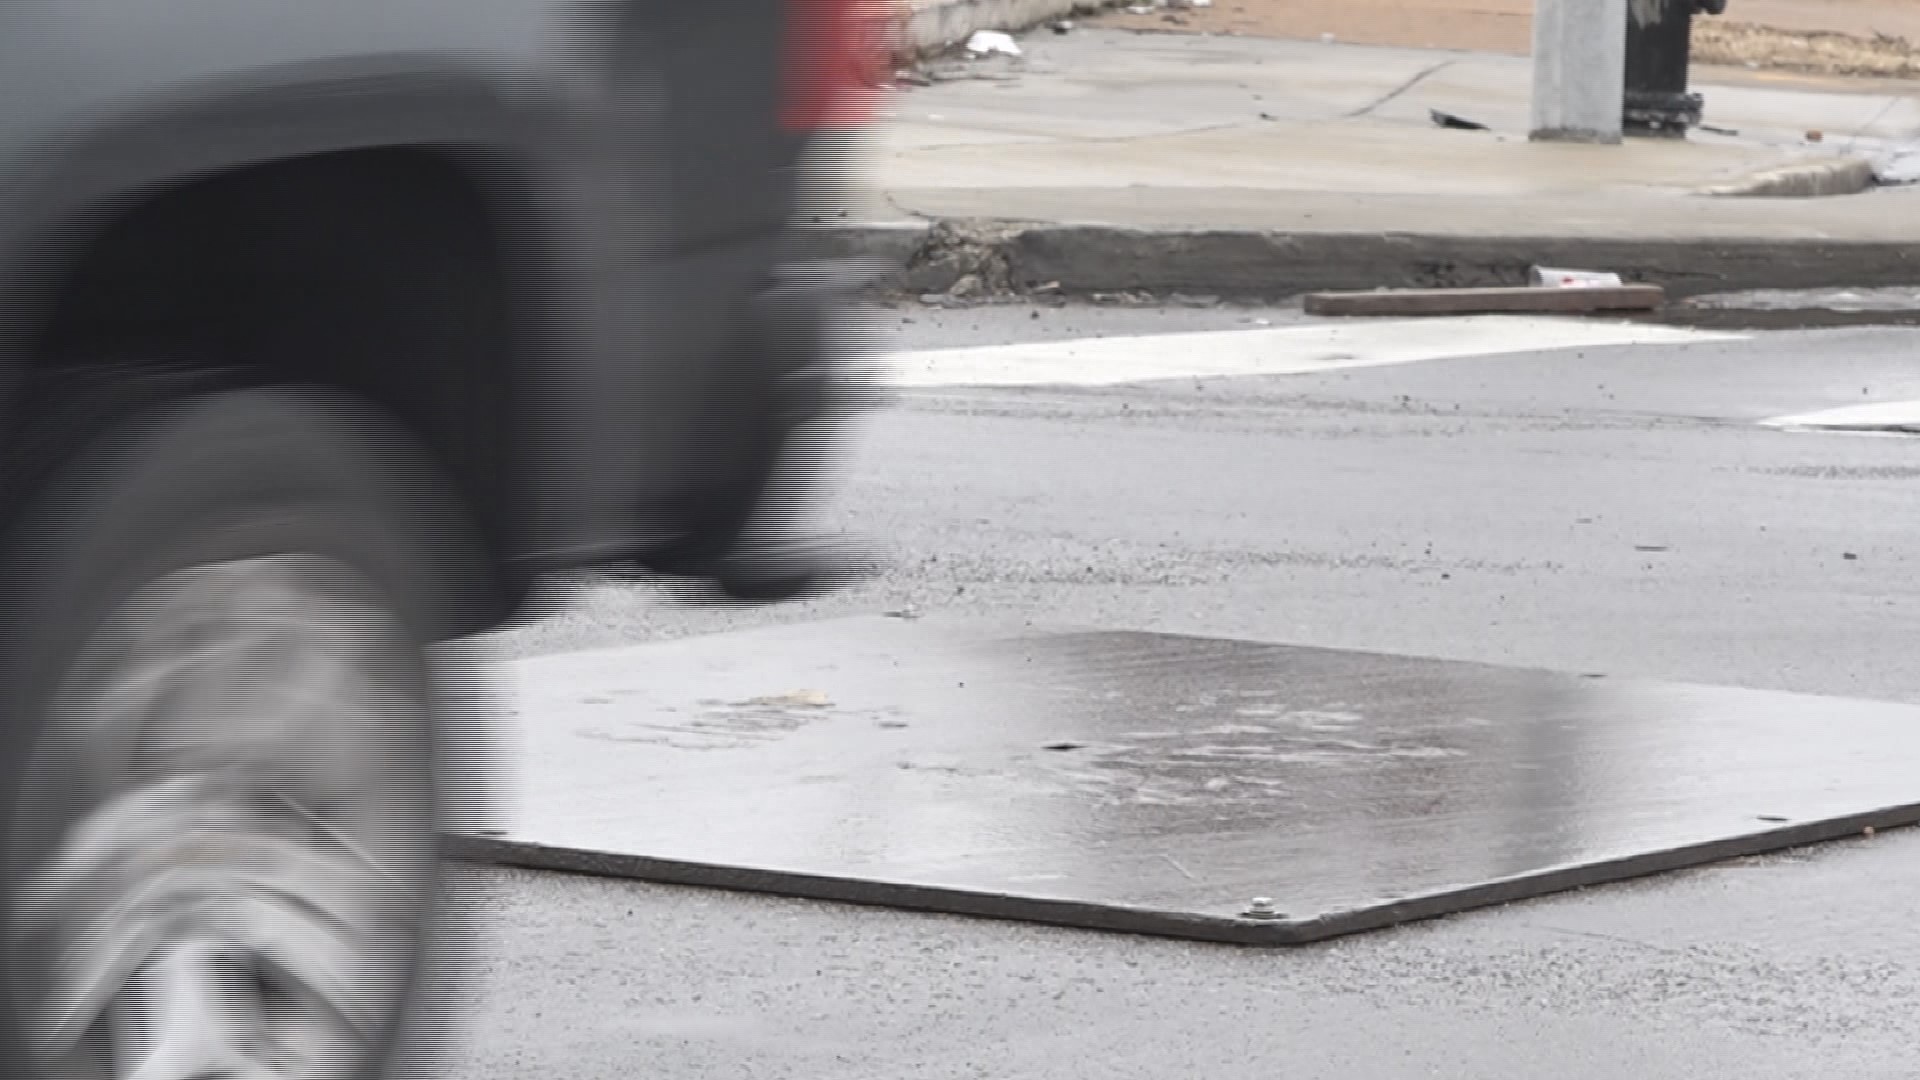 Warmer temperatures might mean the roads are less icy, but it doesn't necessarily mean a smoother ride. Potholes are causing major issues across the region.